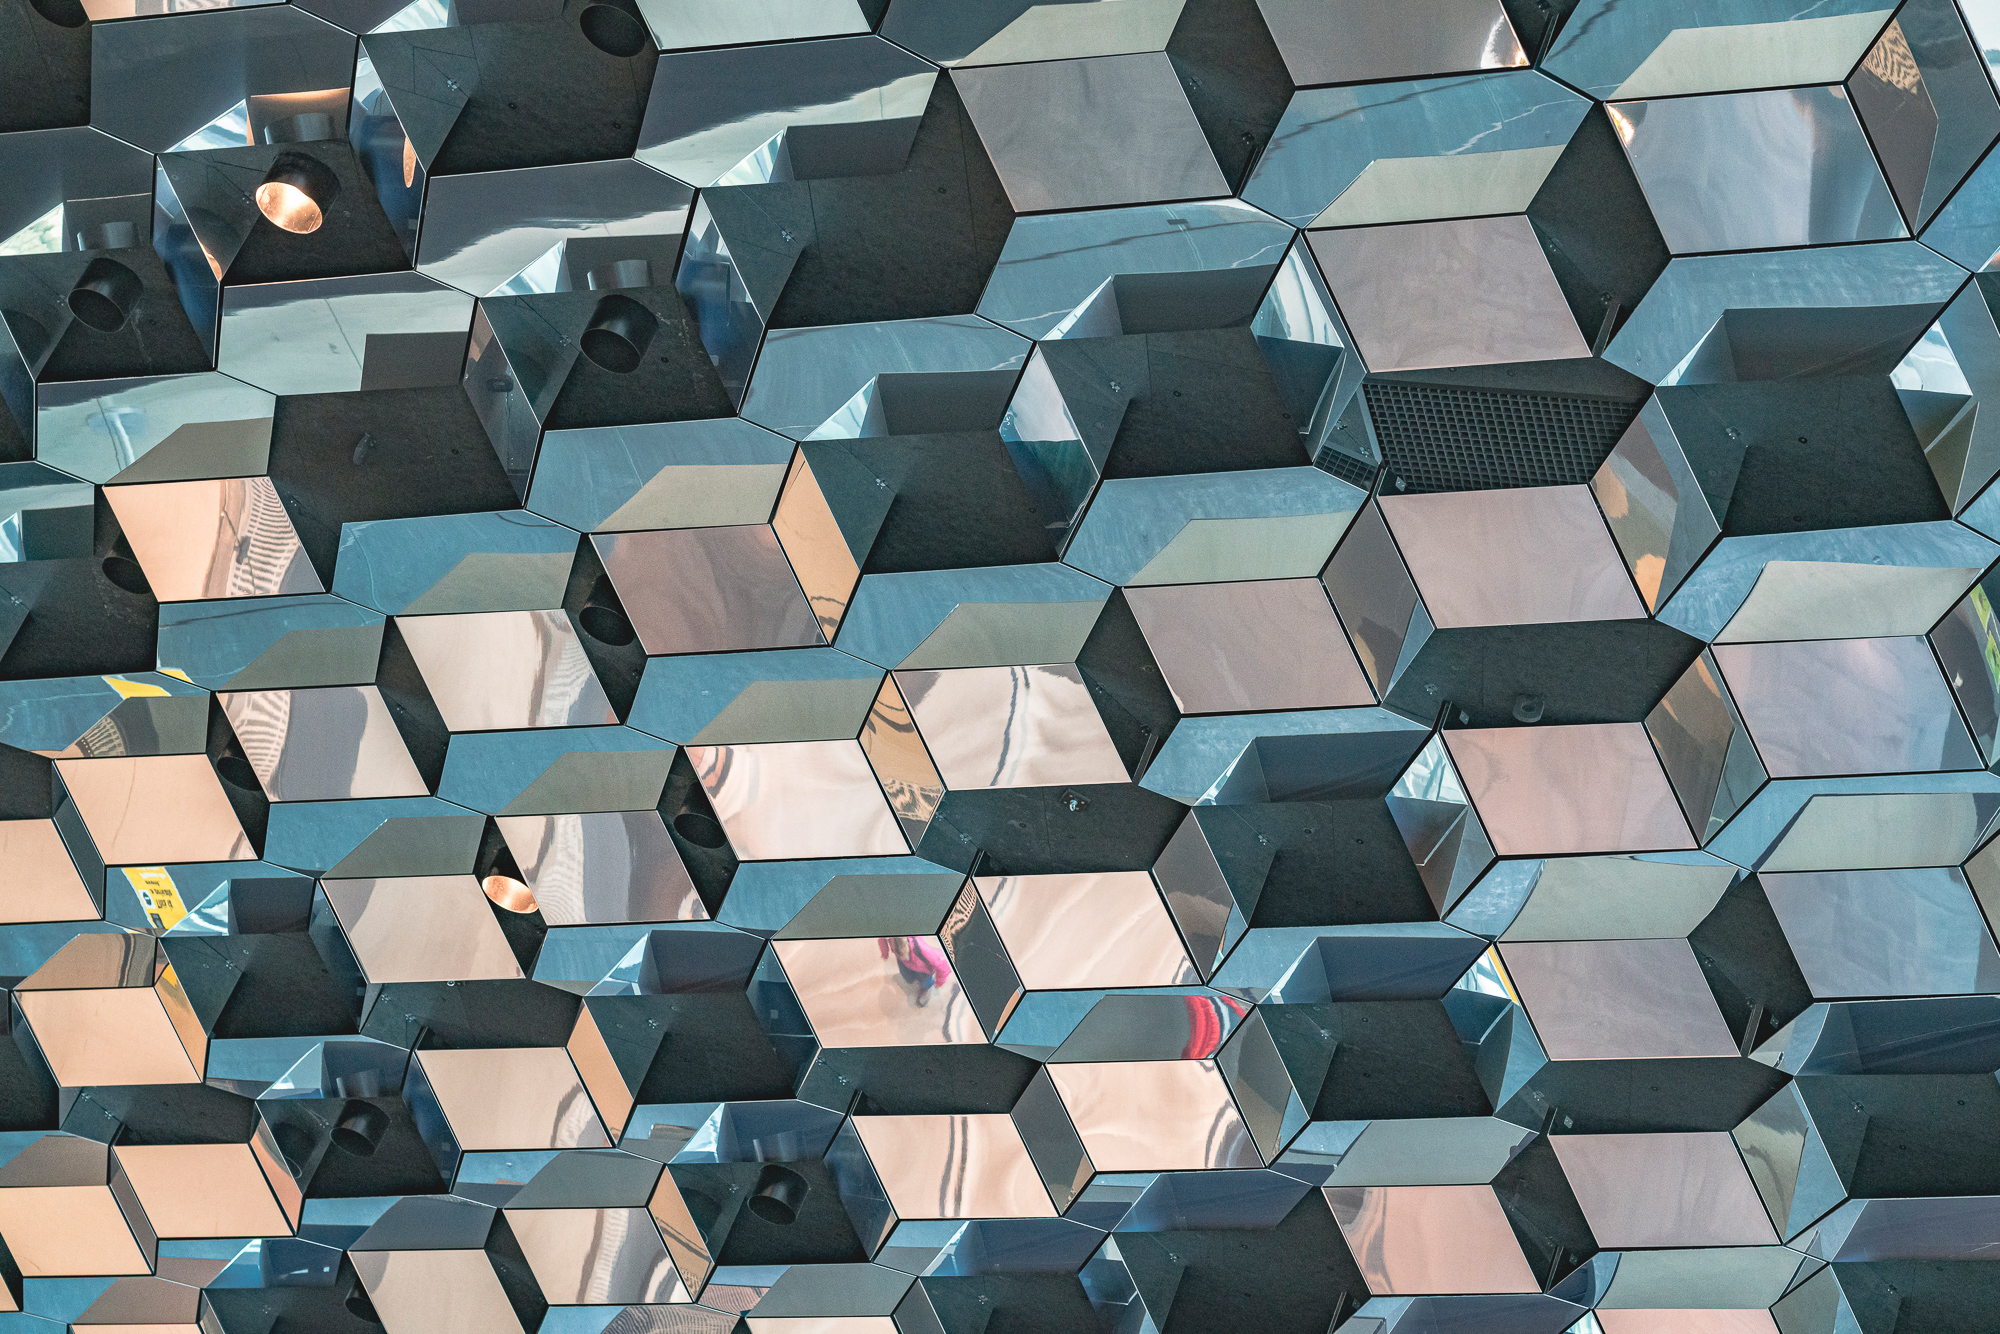 A section of the mirrored ceiling at the Harpa in Reykjavik